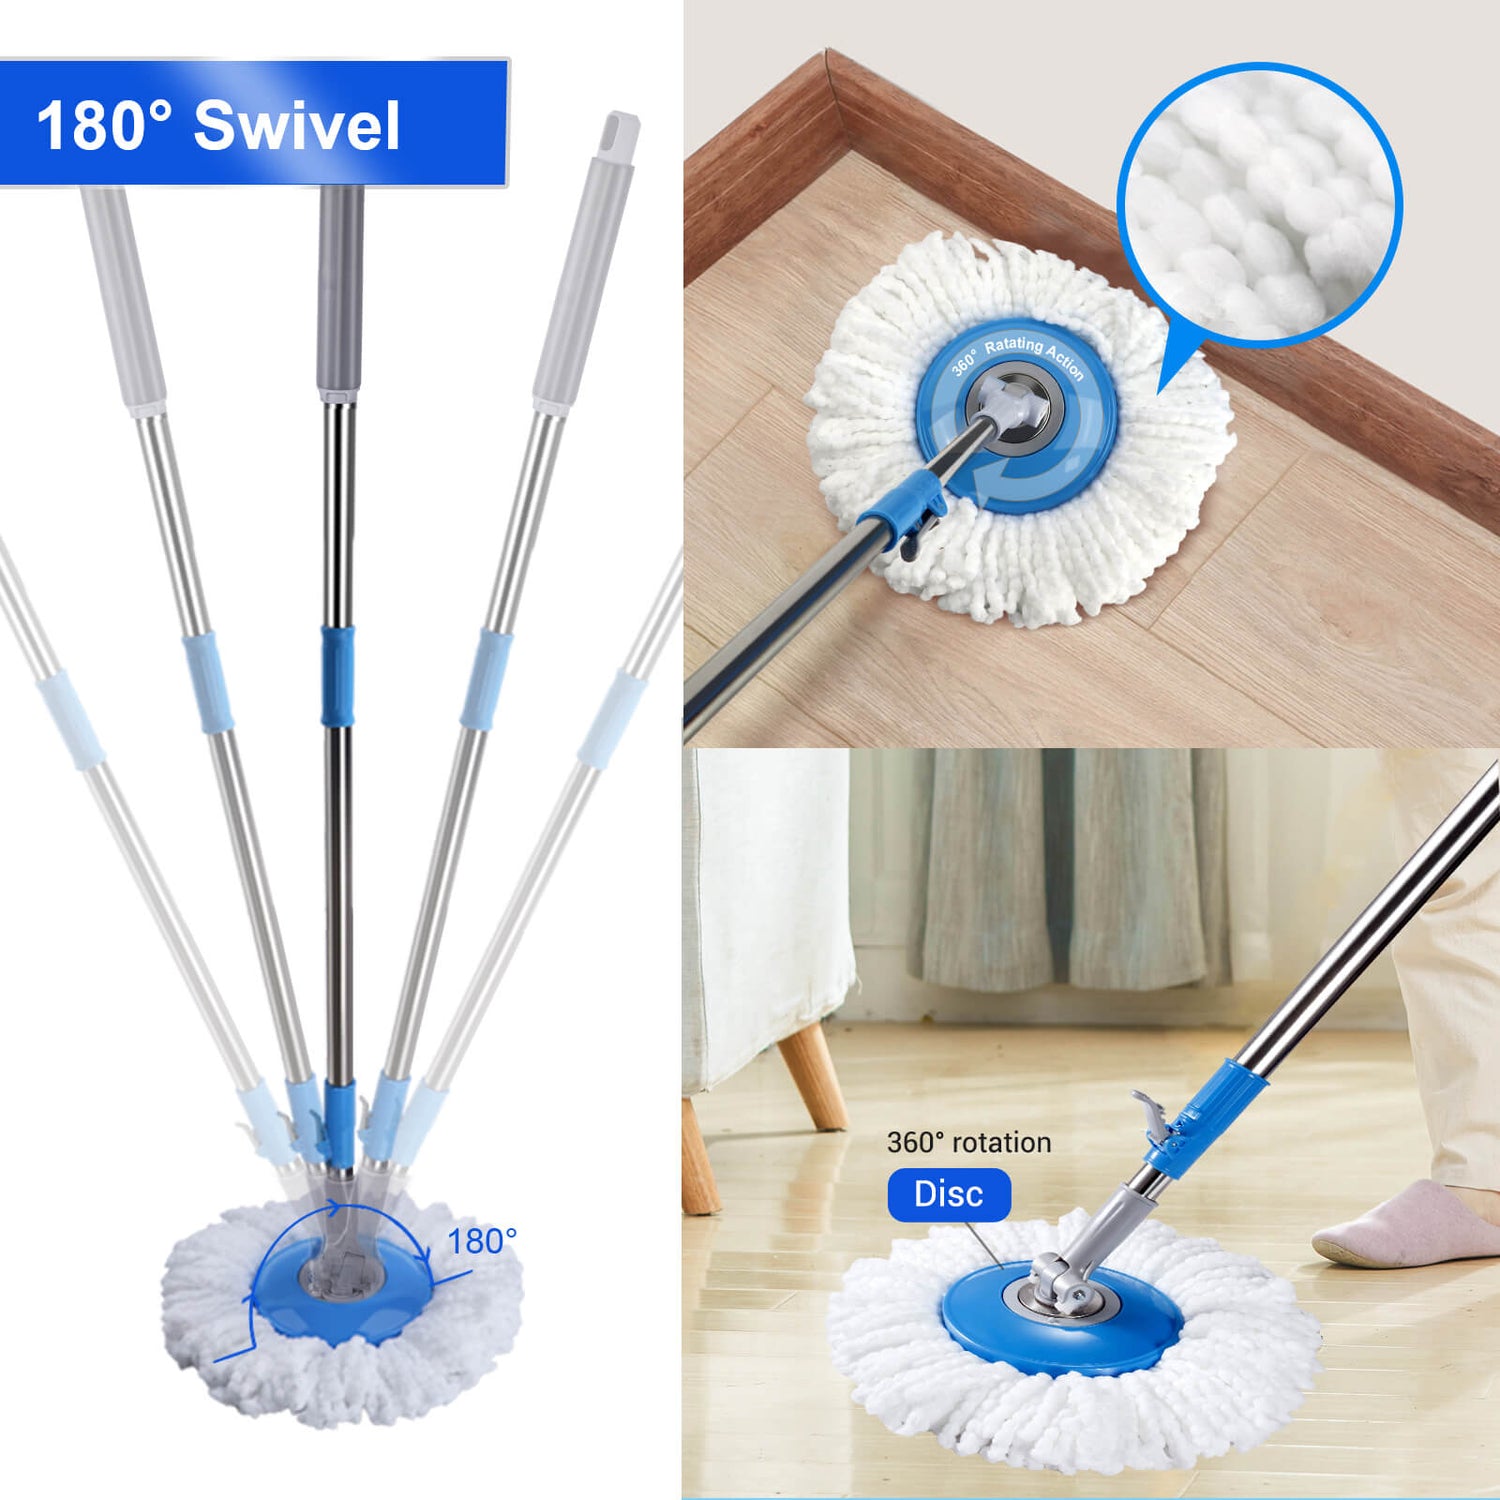 Masthome Microfiber Spin Mop and Bucket with 5 Mop Pads Refills and 1  Cleaning Brush, Self Wringing Mop and Foot Pedal Bucket System for Hardwood